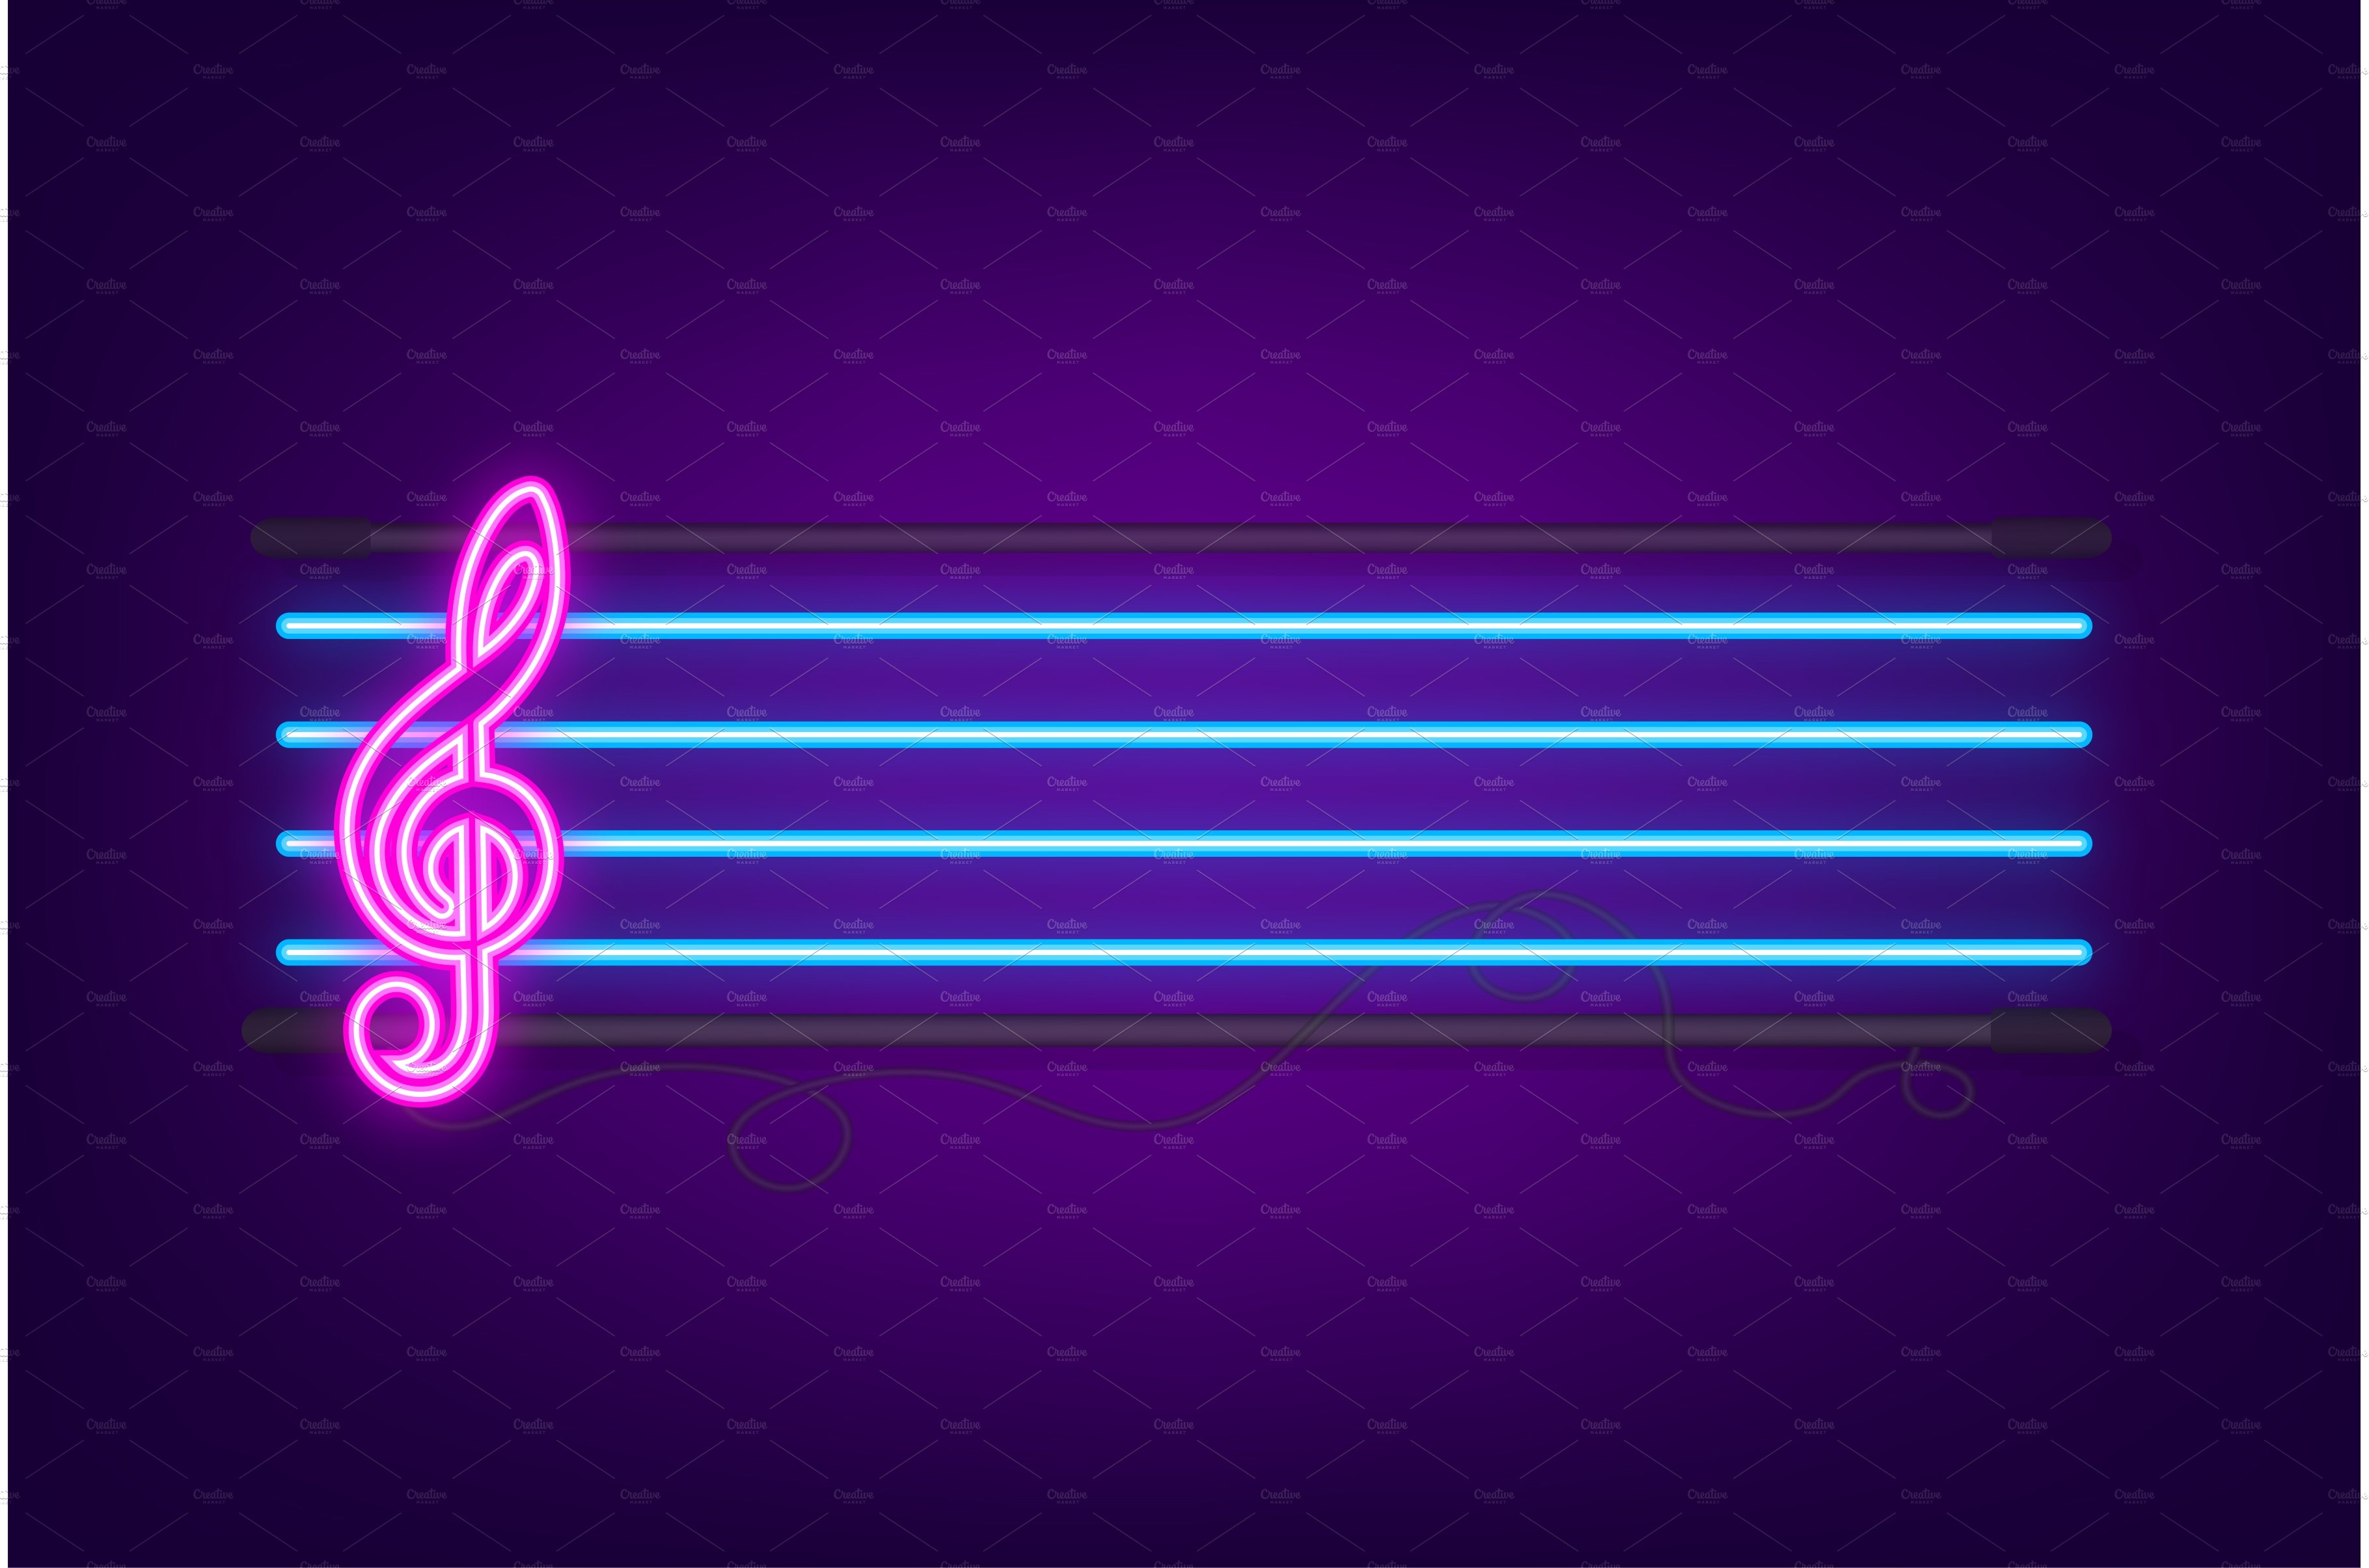 Collection of music note icon on cover image.